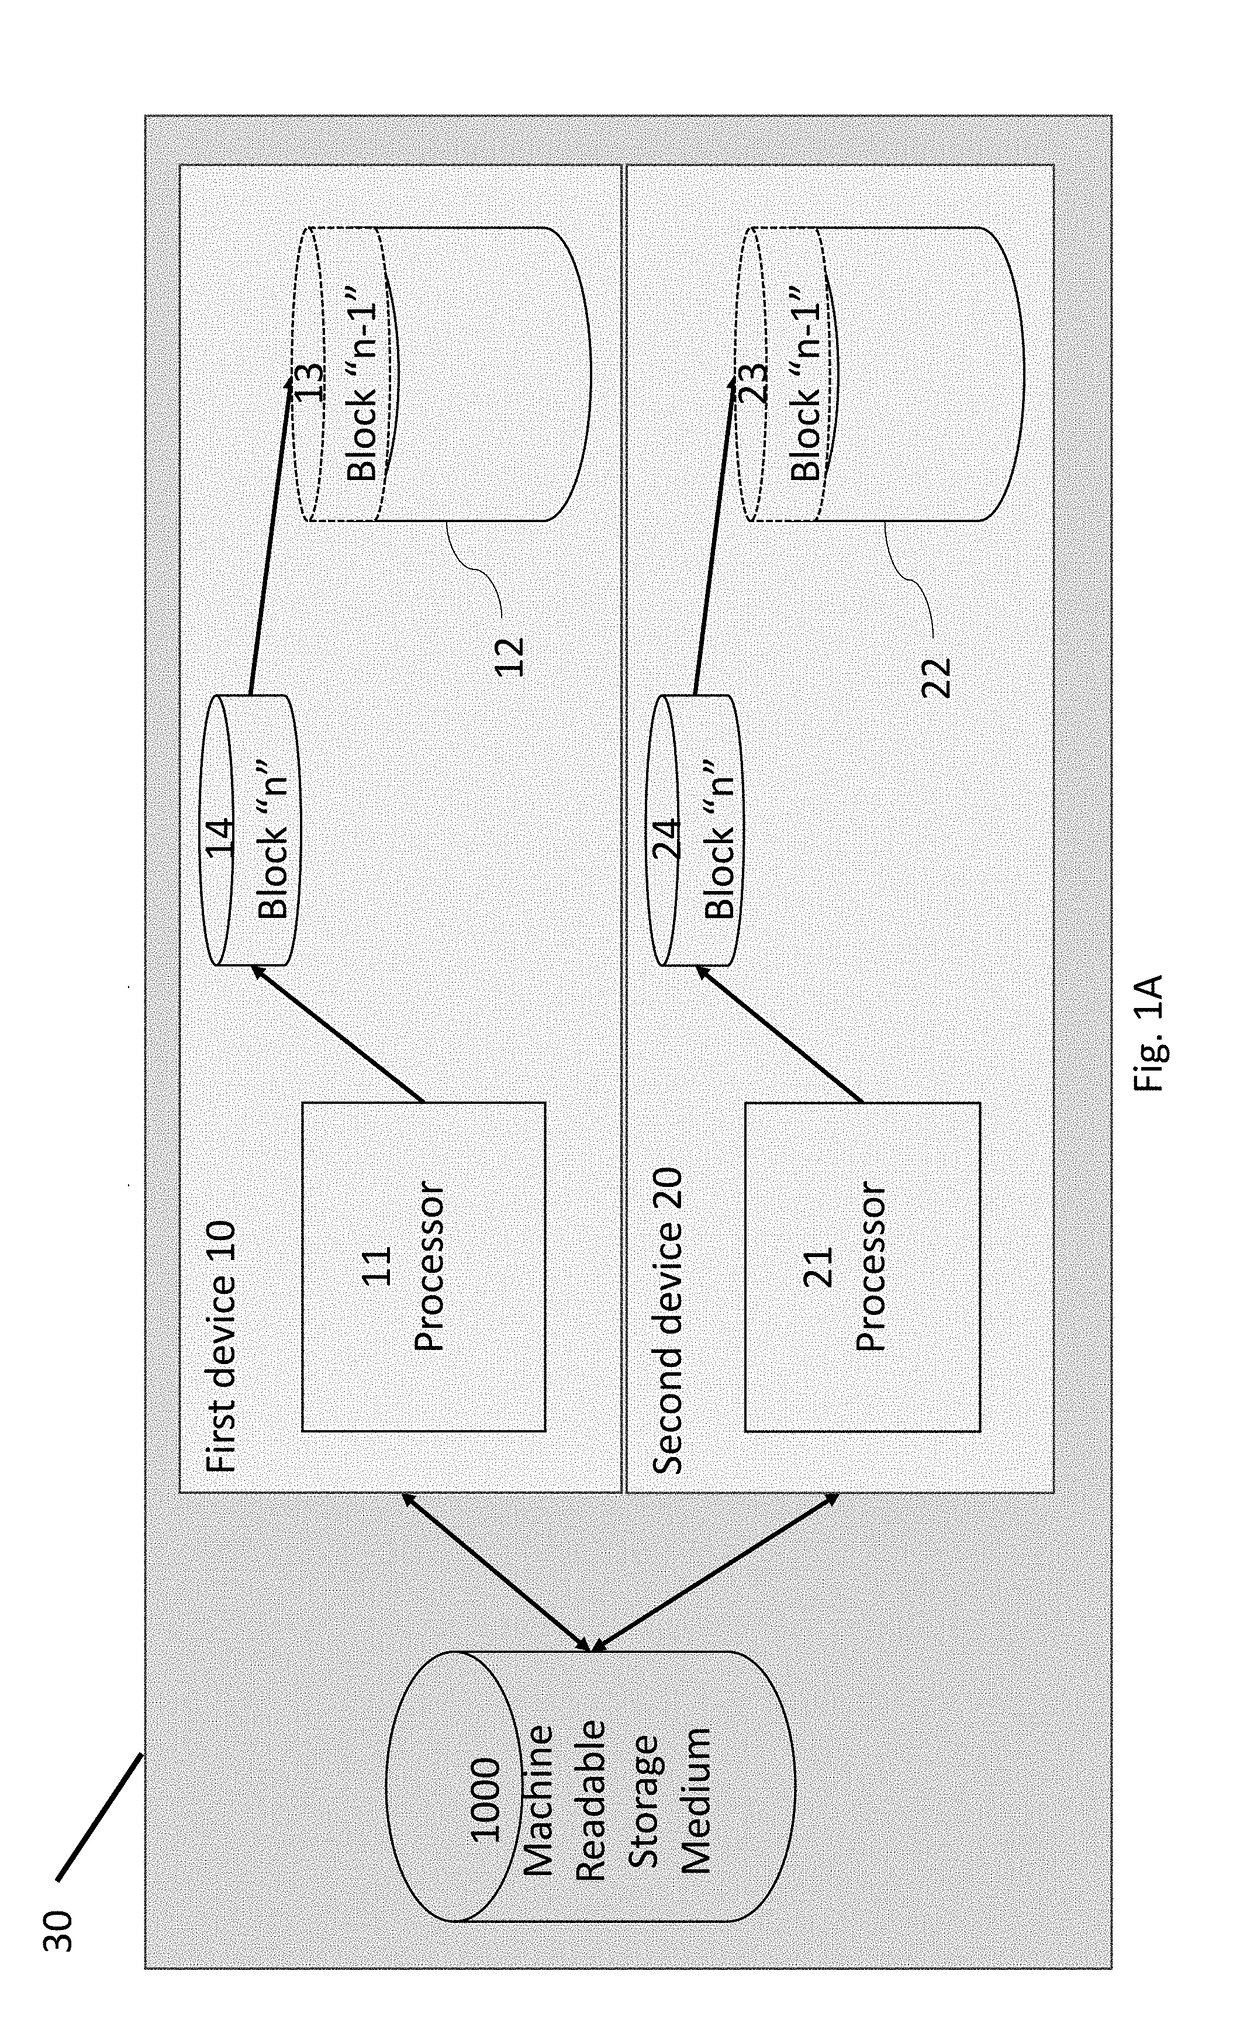 Systems and Methods for Extending the Utility of Blockchains Through Use of Related Child Blockchains